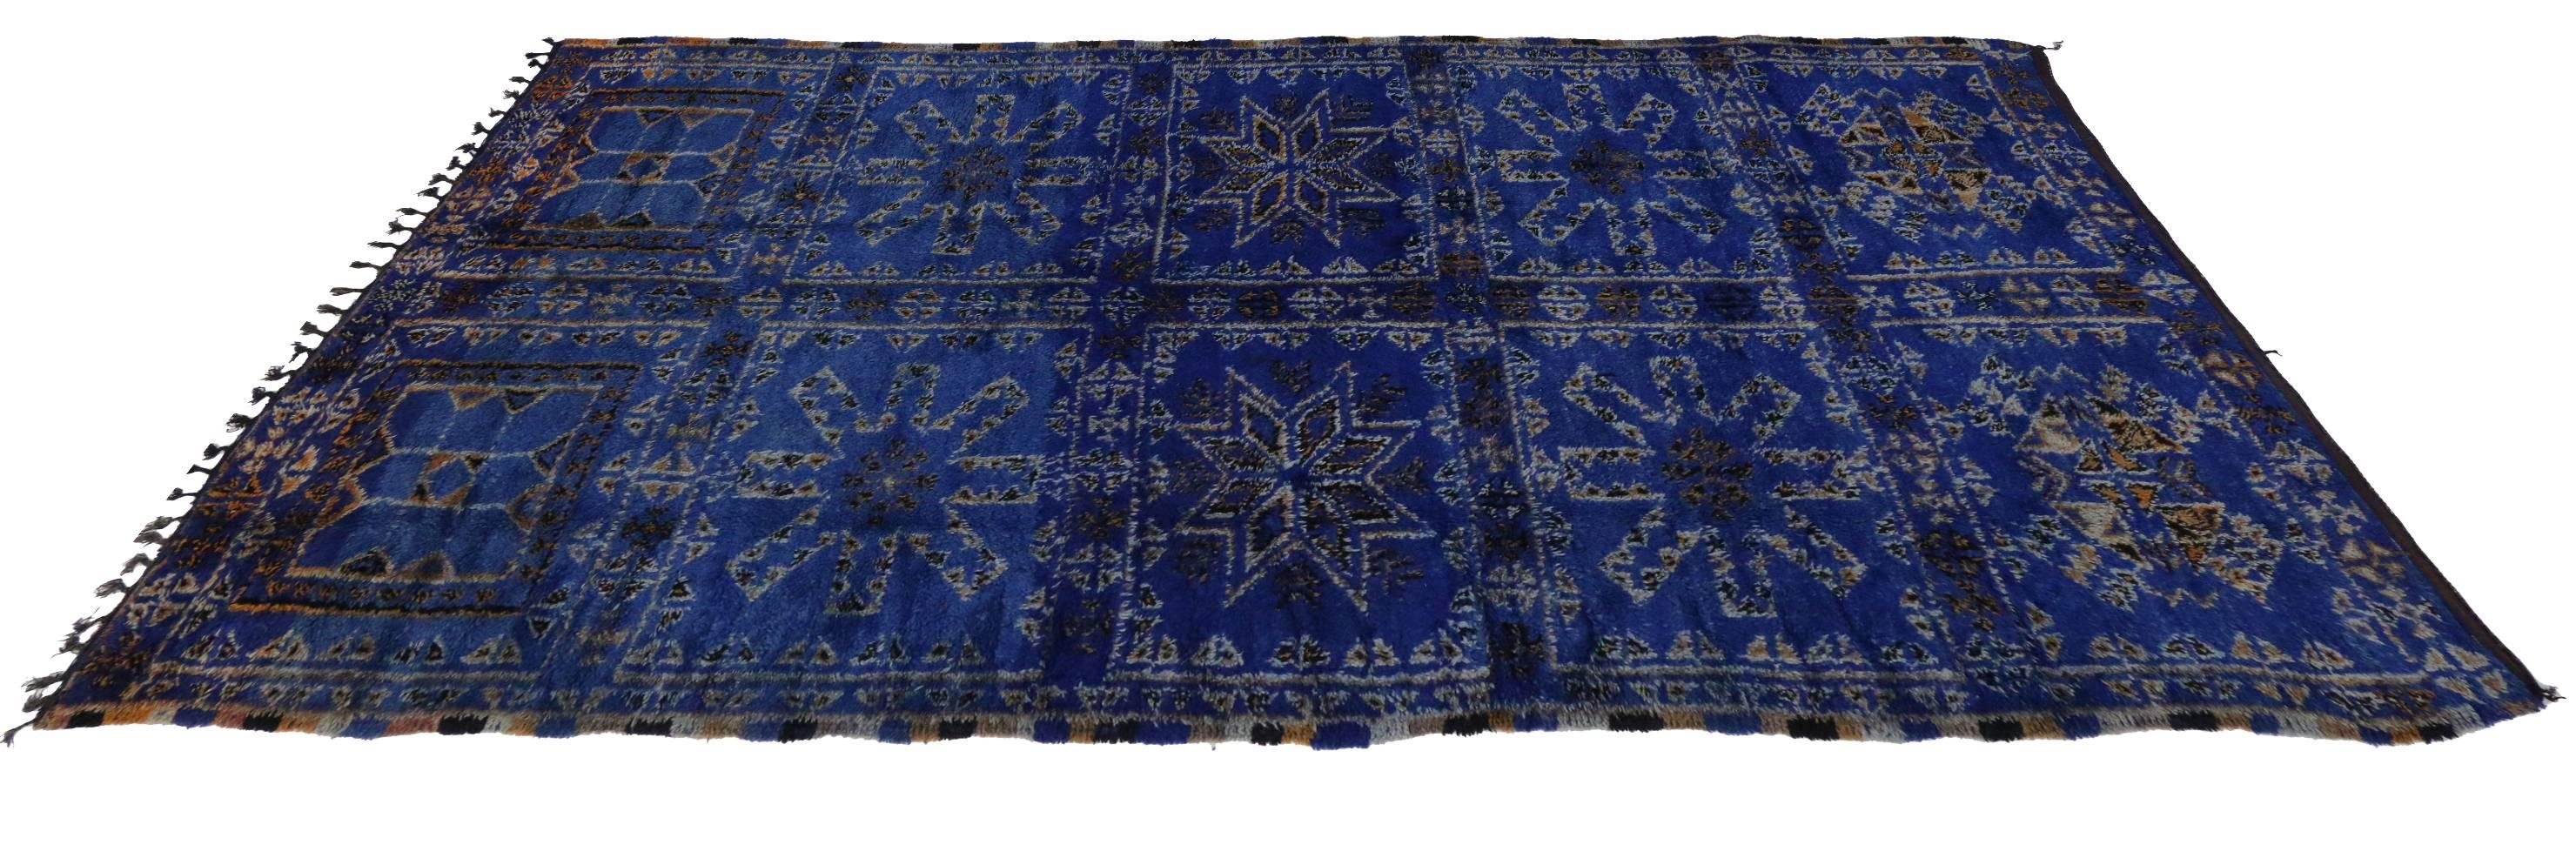 Hand-Knotted Cobalt Blue Vintage Moroccan Rug by Beni Ouarain